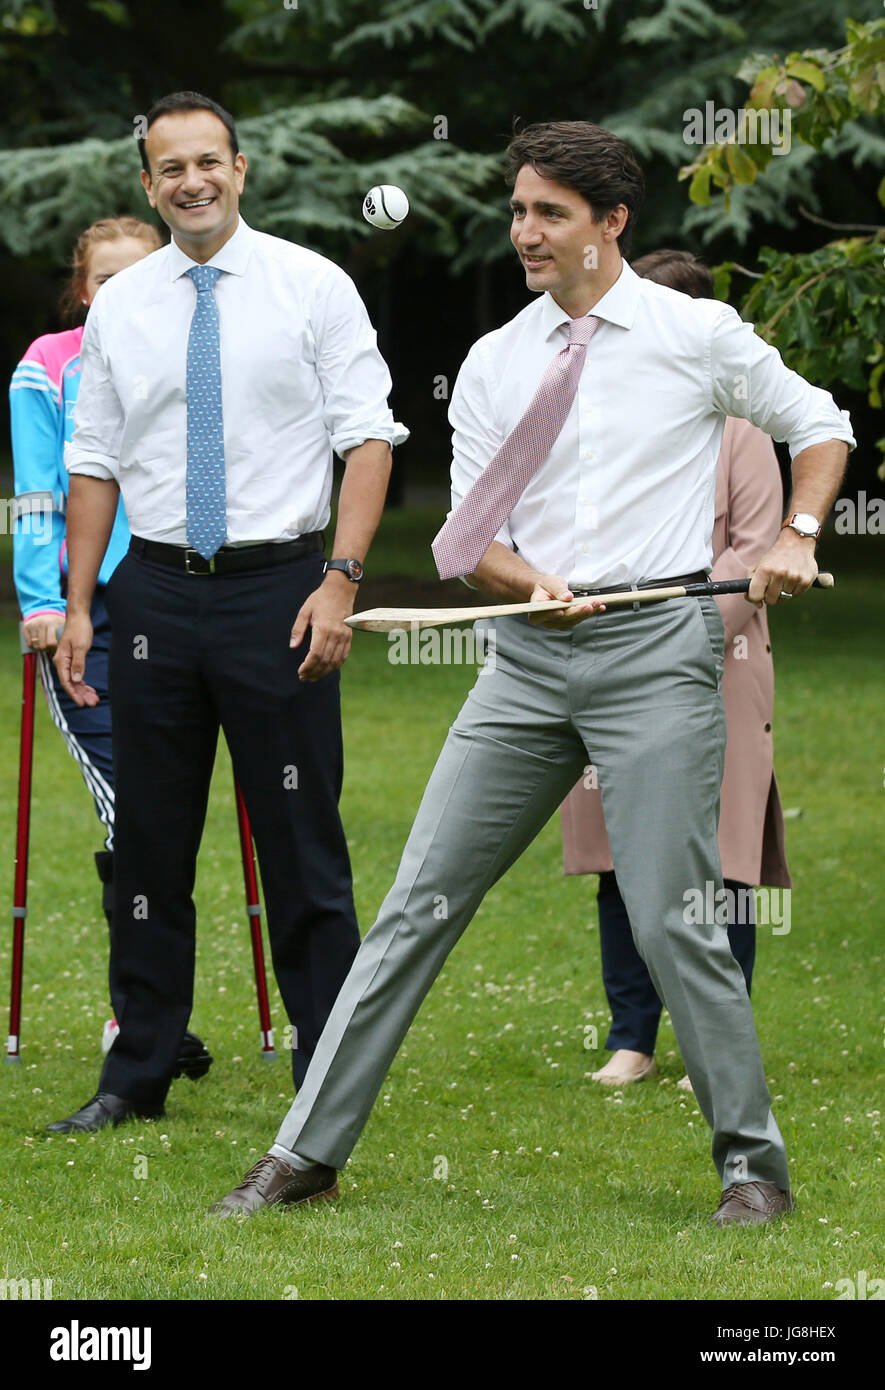 Ireland. 4th July, 2017. Official Visit to Ireland - Prime Minister of Canada Justin Trudeau. Taoiseach and Fine Gael leader Leo Varadkar TD watches as Prime Minister of Canada Justin Trudeau trys out Irelands national sport with a hurley and ball in Farmleigh, Dublin this morning. The Prime Minister of Canada Justin Trudeau is on an Official Visit to Ireland. Hurling which is played with 15 men on each side, is believed to be the fasted sport in the world. Photo: Sam Boal/Rollingnews.ie /Alamy Live News Stock Photo